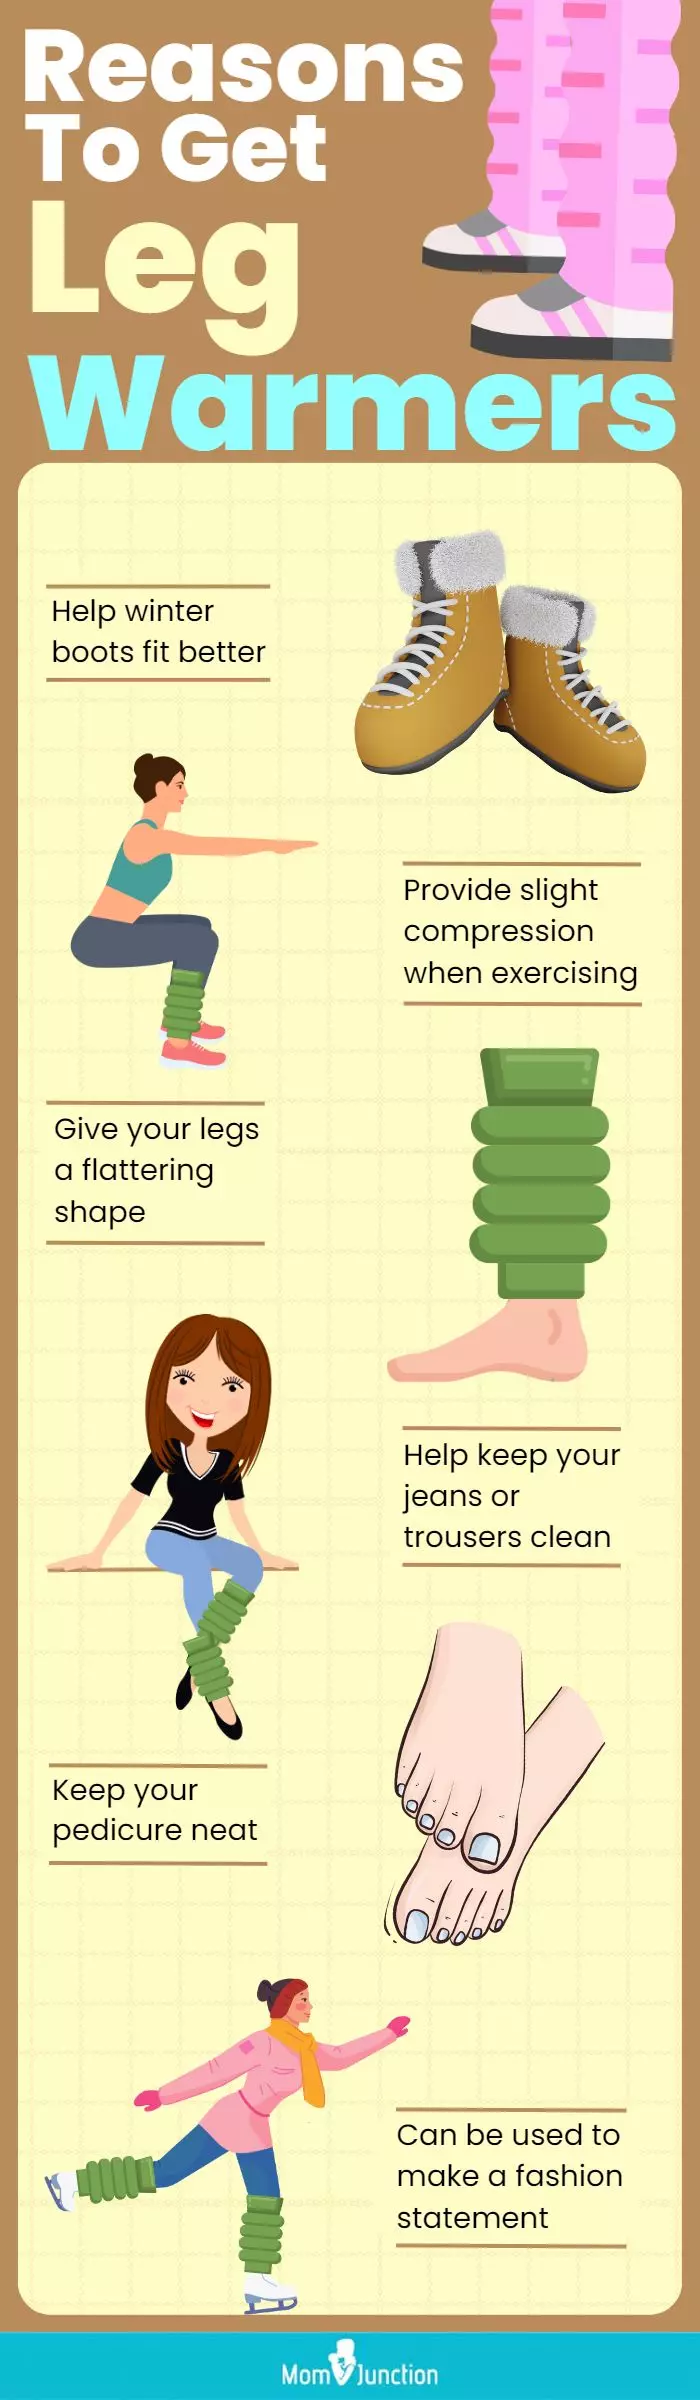 Reasons To Get Leg Warmers (Infographic)